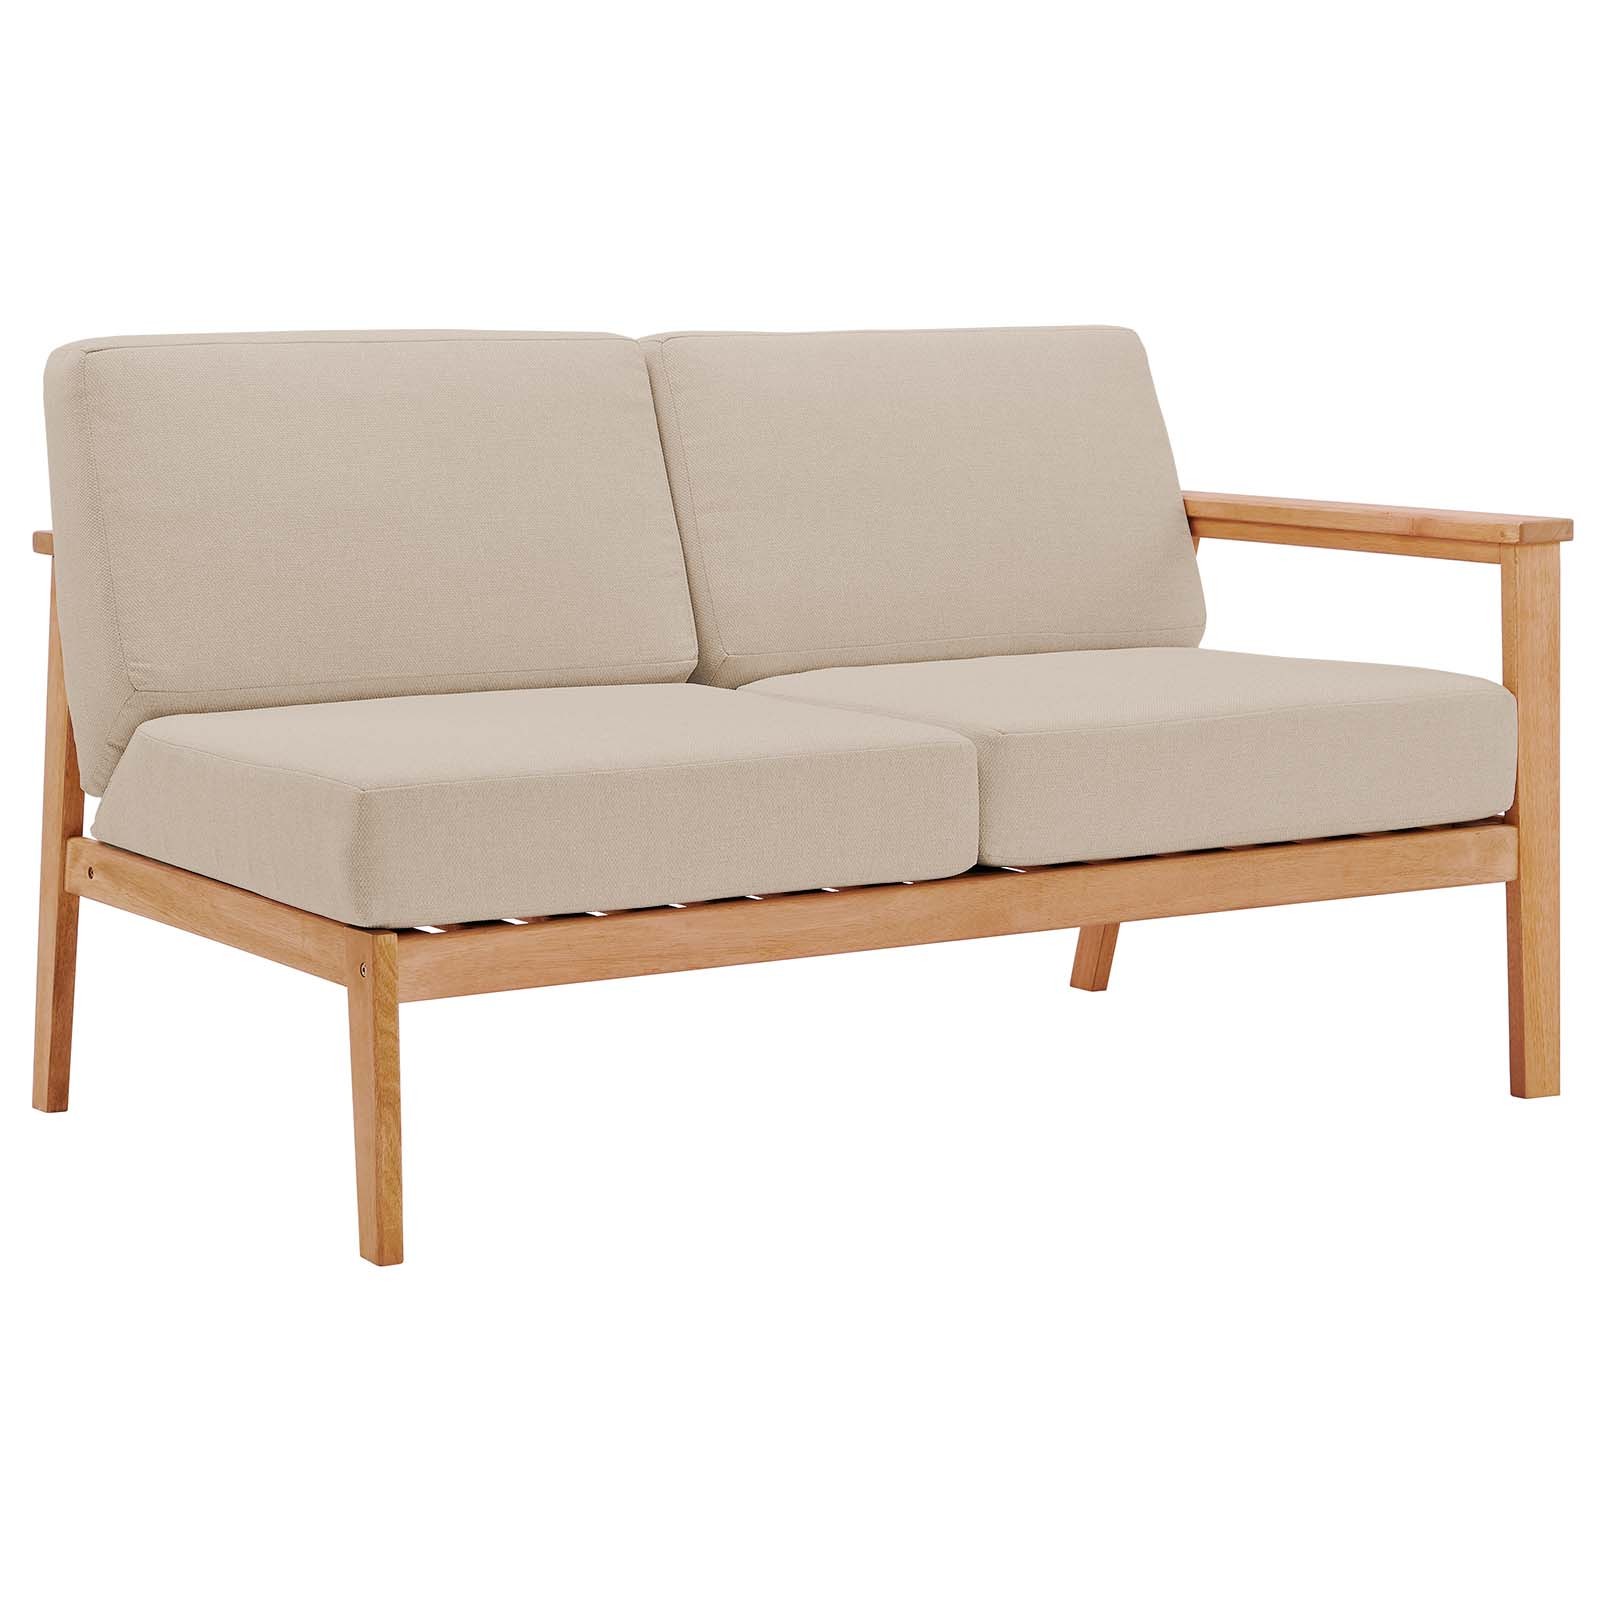 Sedona Outdoor Patio Eucalyptus Wood Right-Facing Loveseat in Natural Taupe